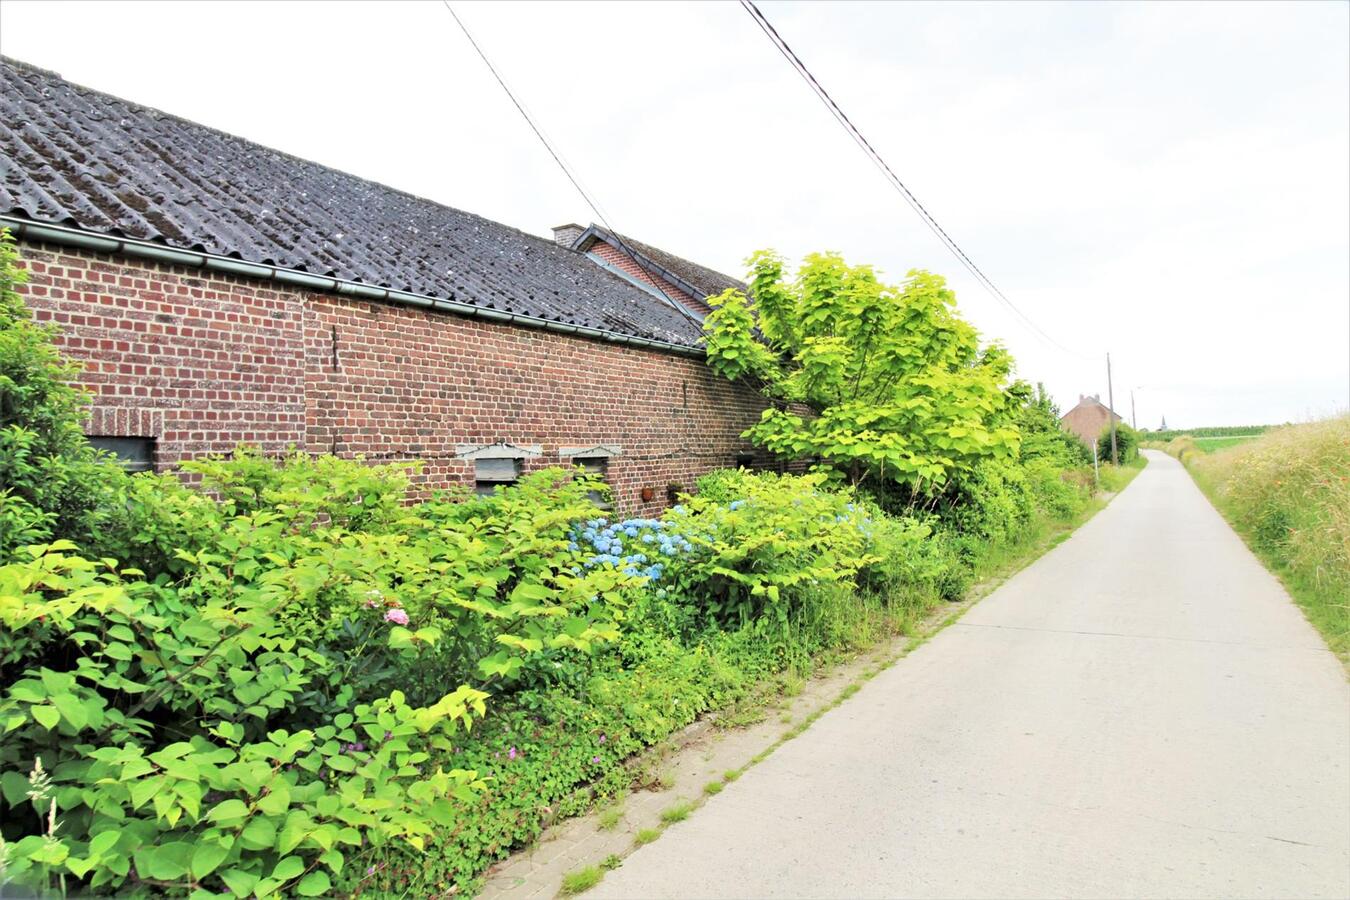 Property sold in Waanrode